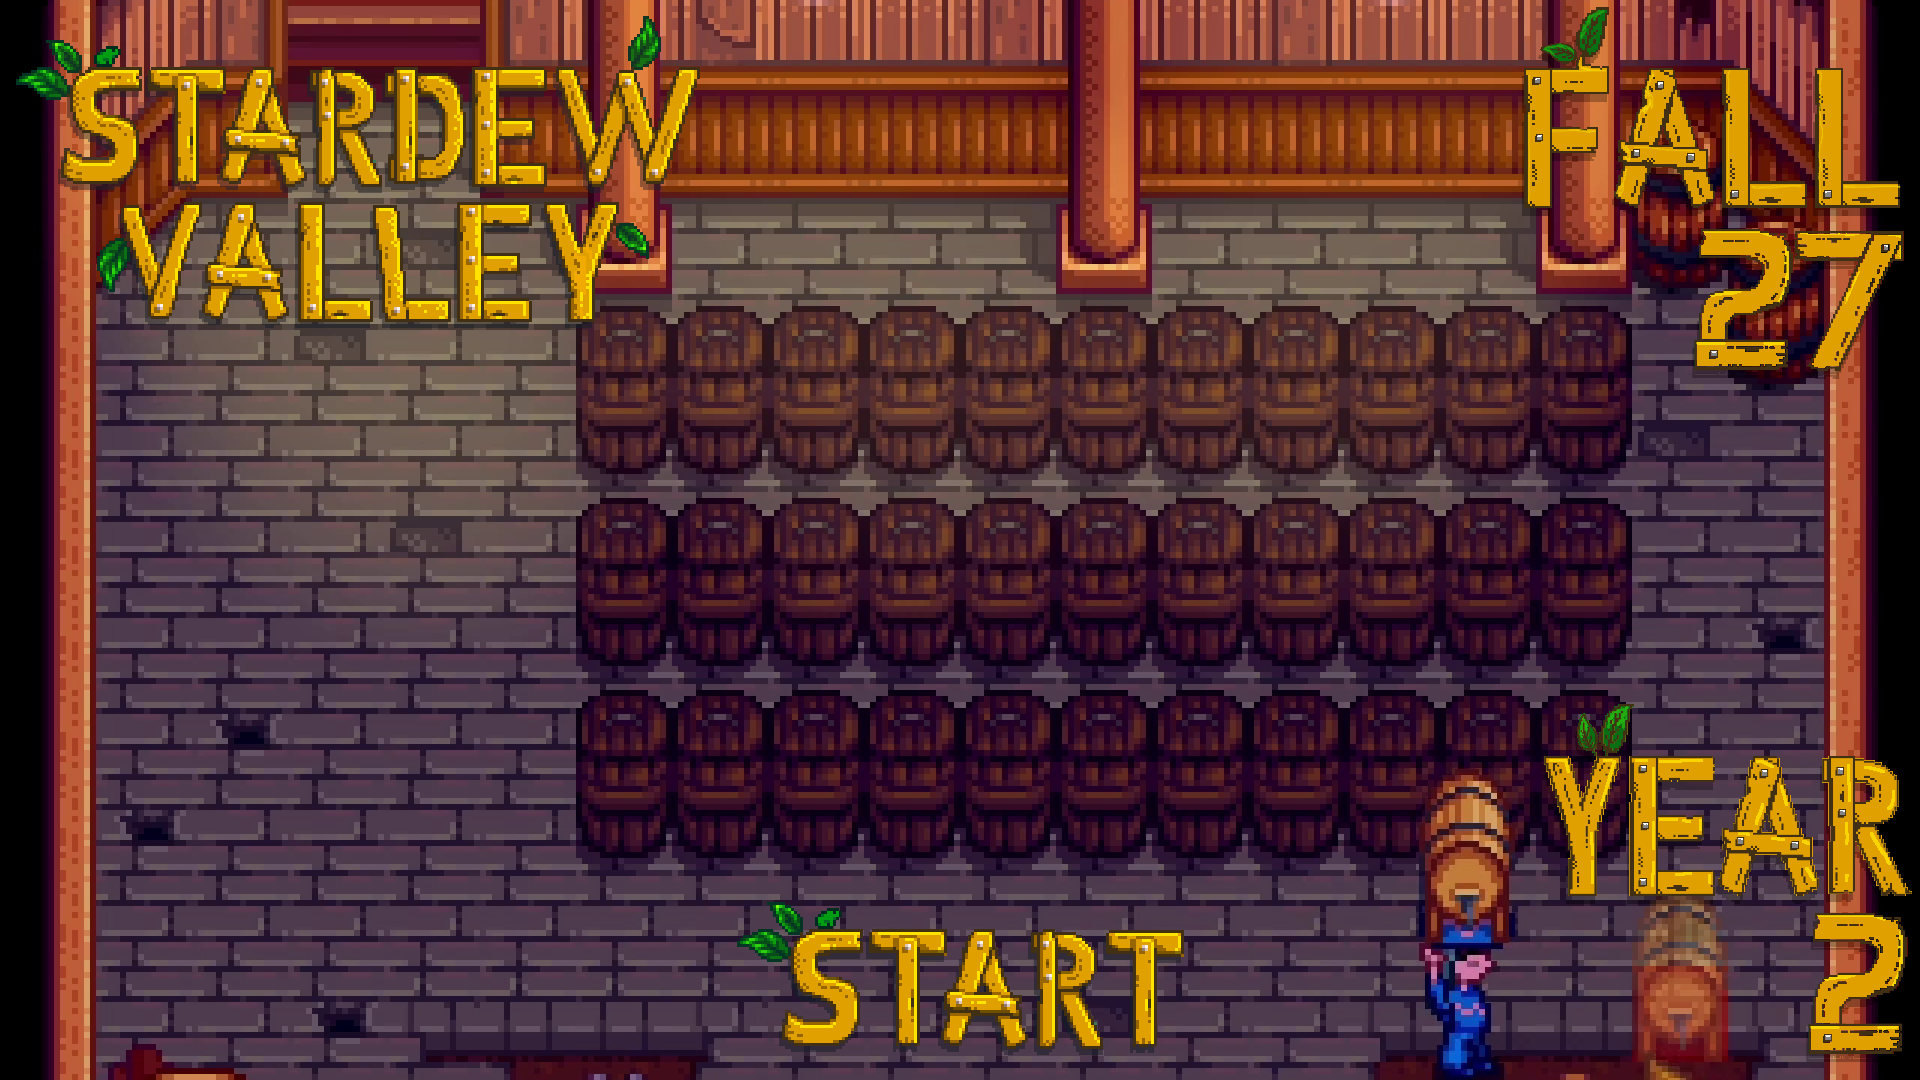 Why would I want to increase my encounter rate? – Stardew Valley, Fall 27, Year 2, Start